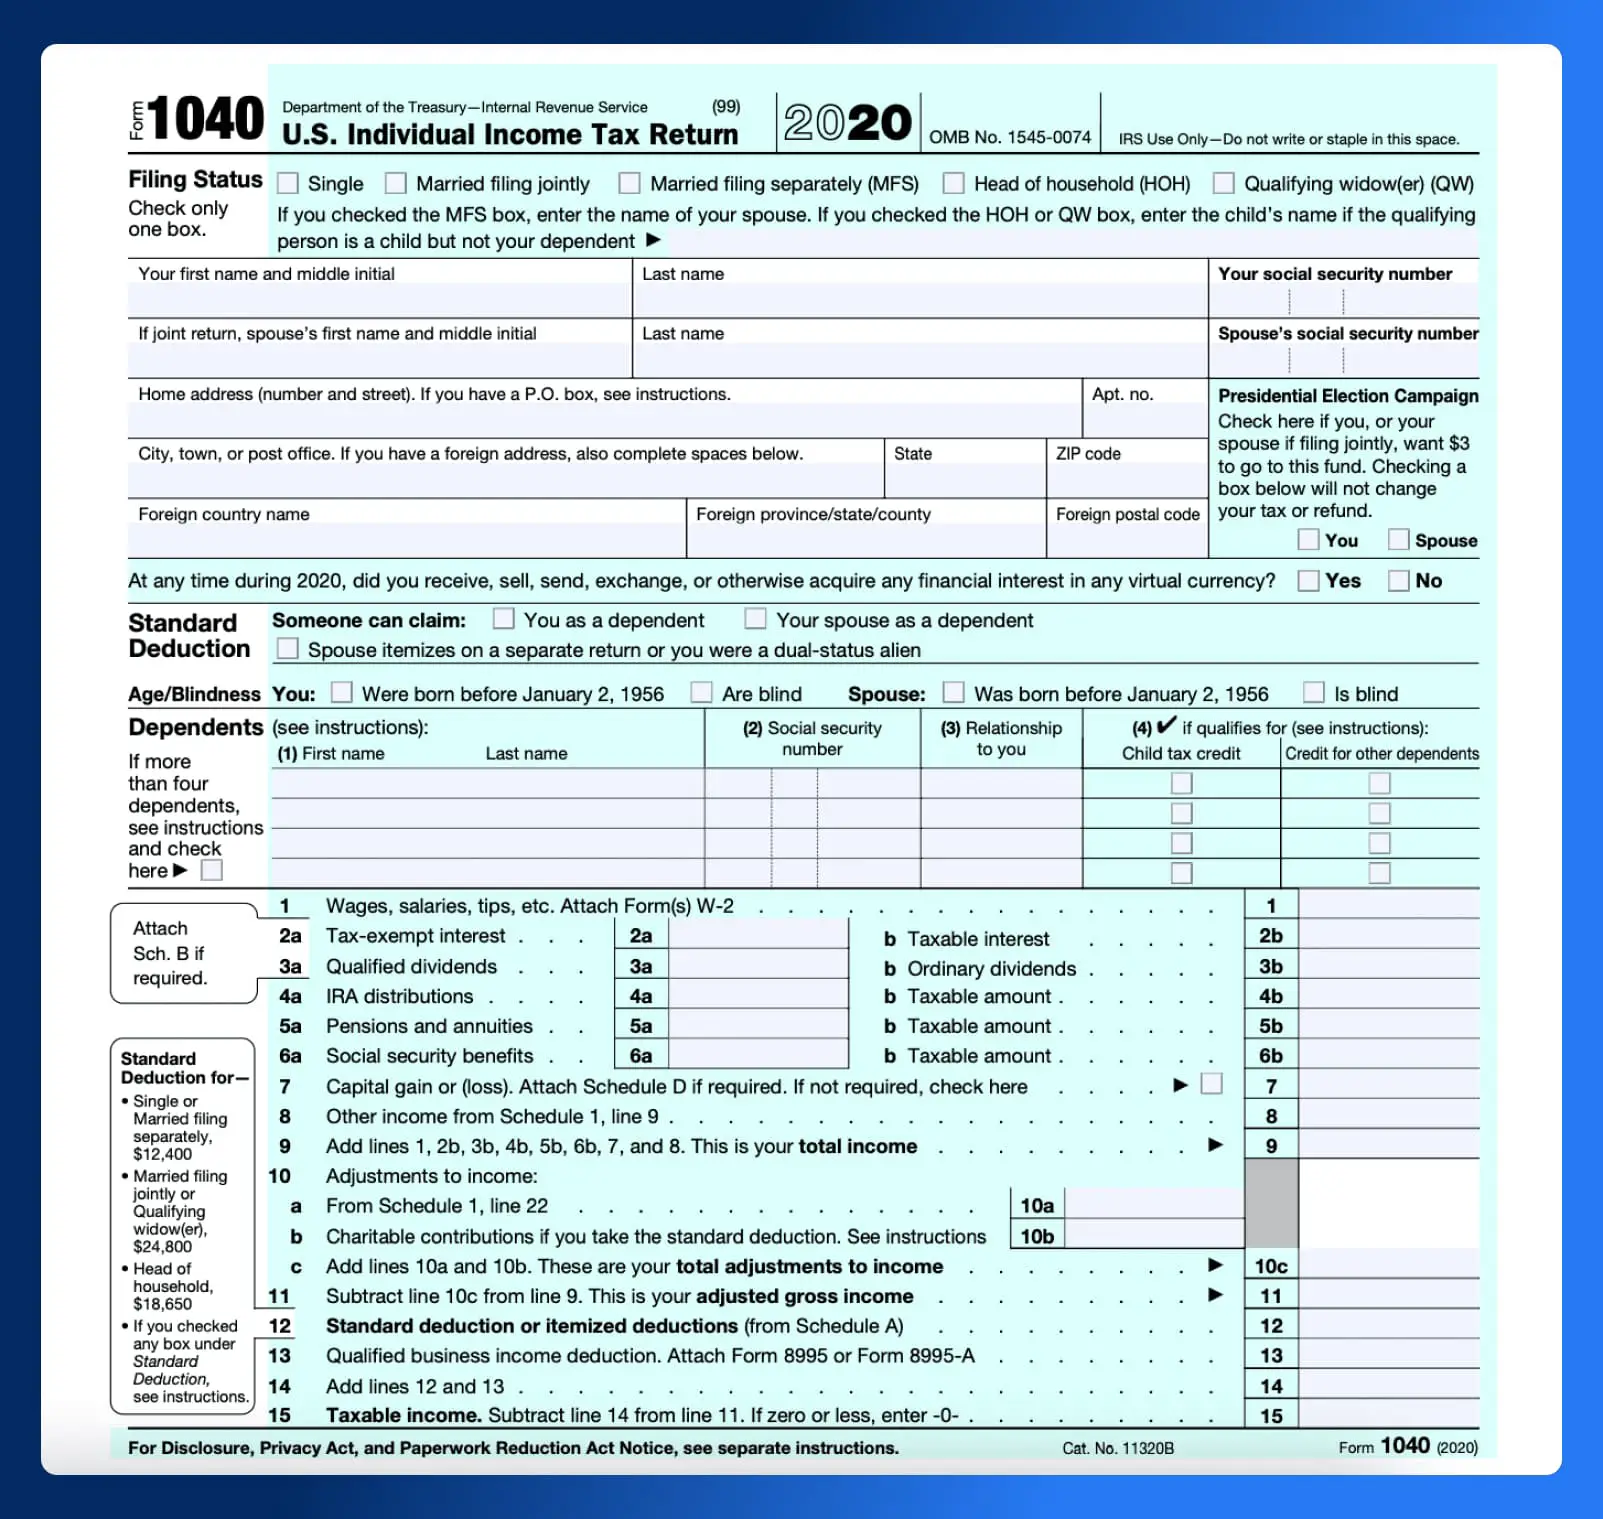 How to Calculate Payroll Taxes